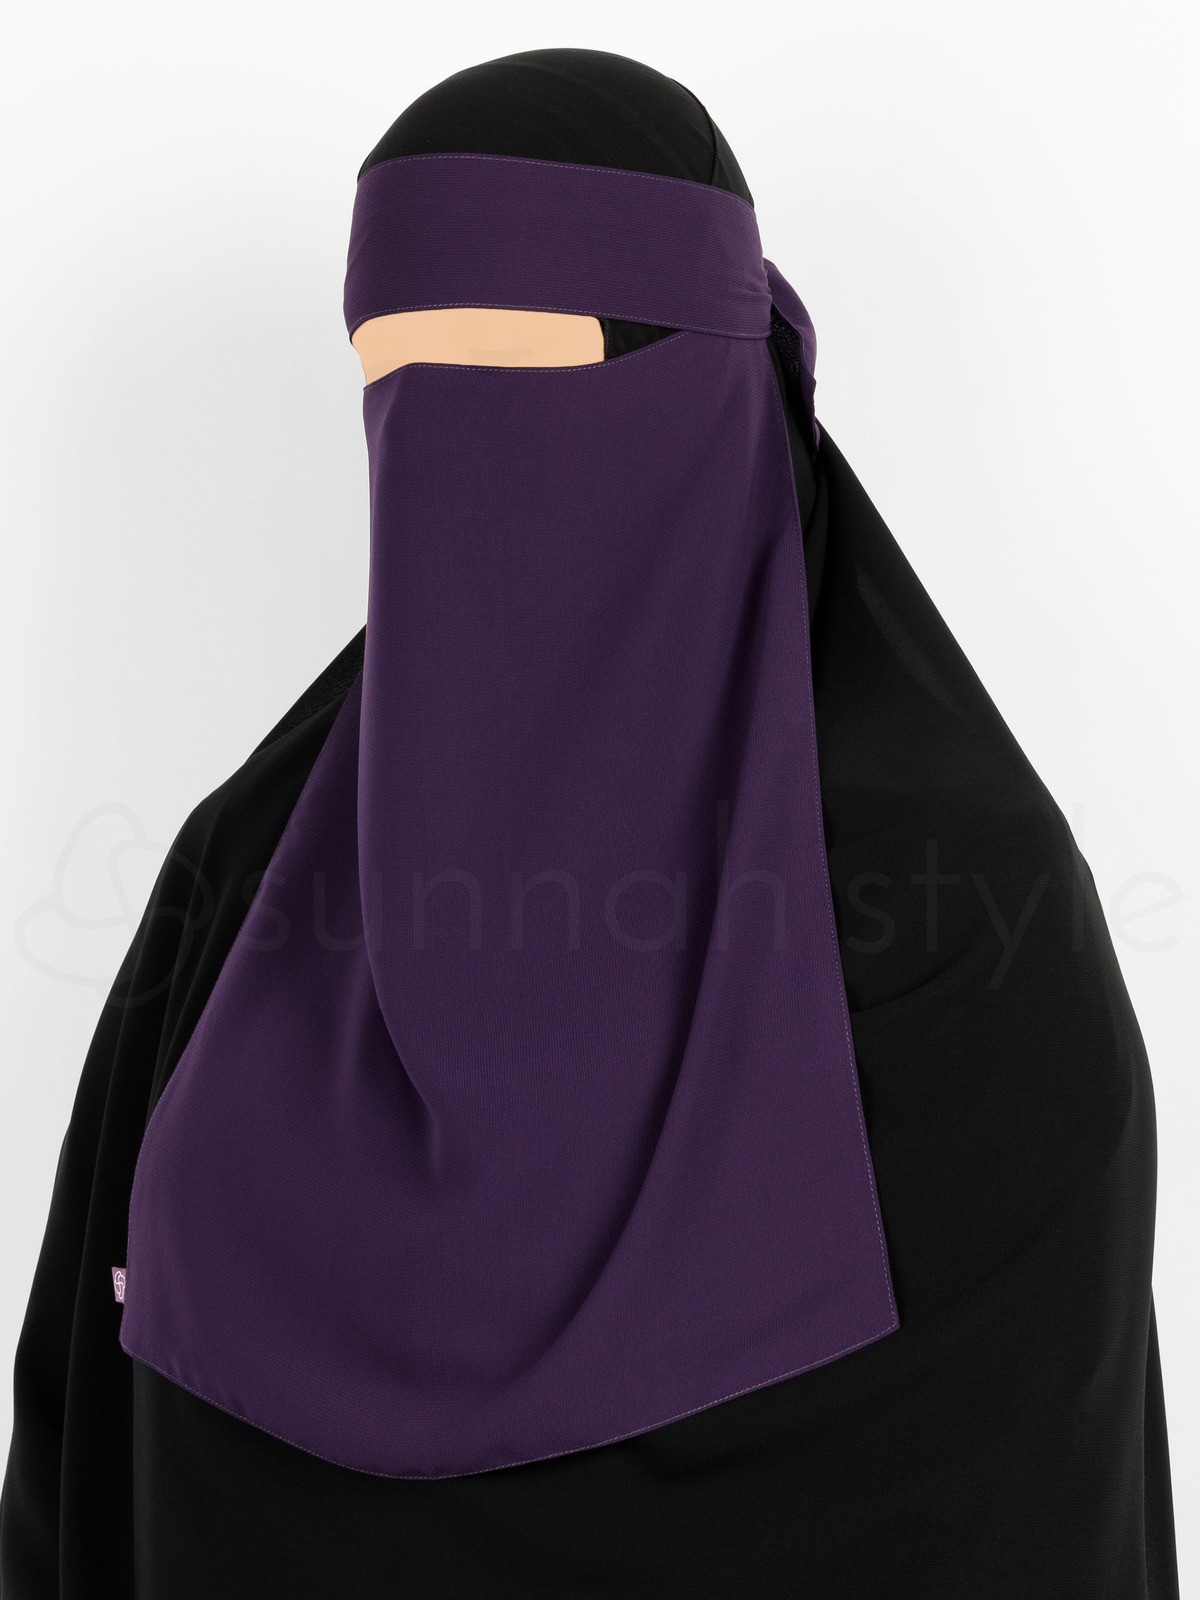 Sunnah Style - Pull-Down One Layer Niqab (Violet)